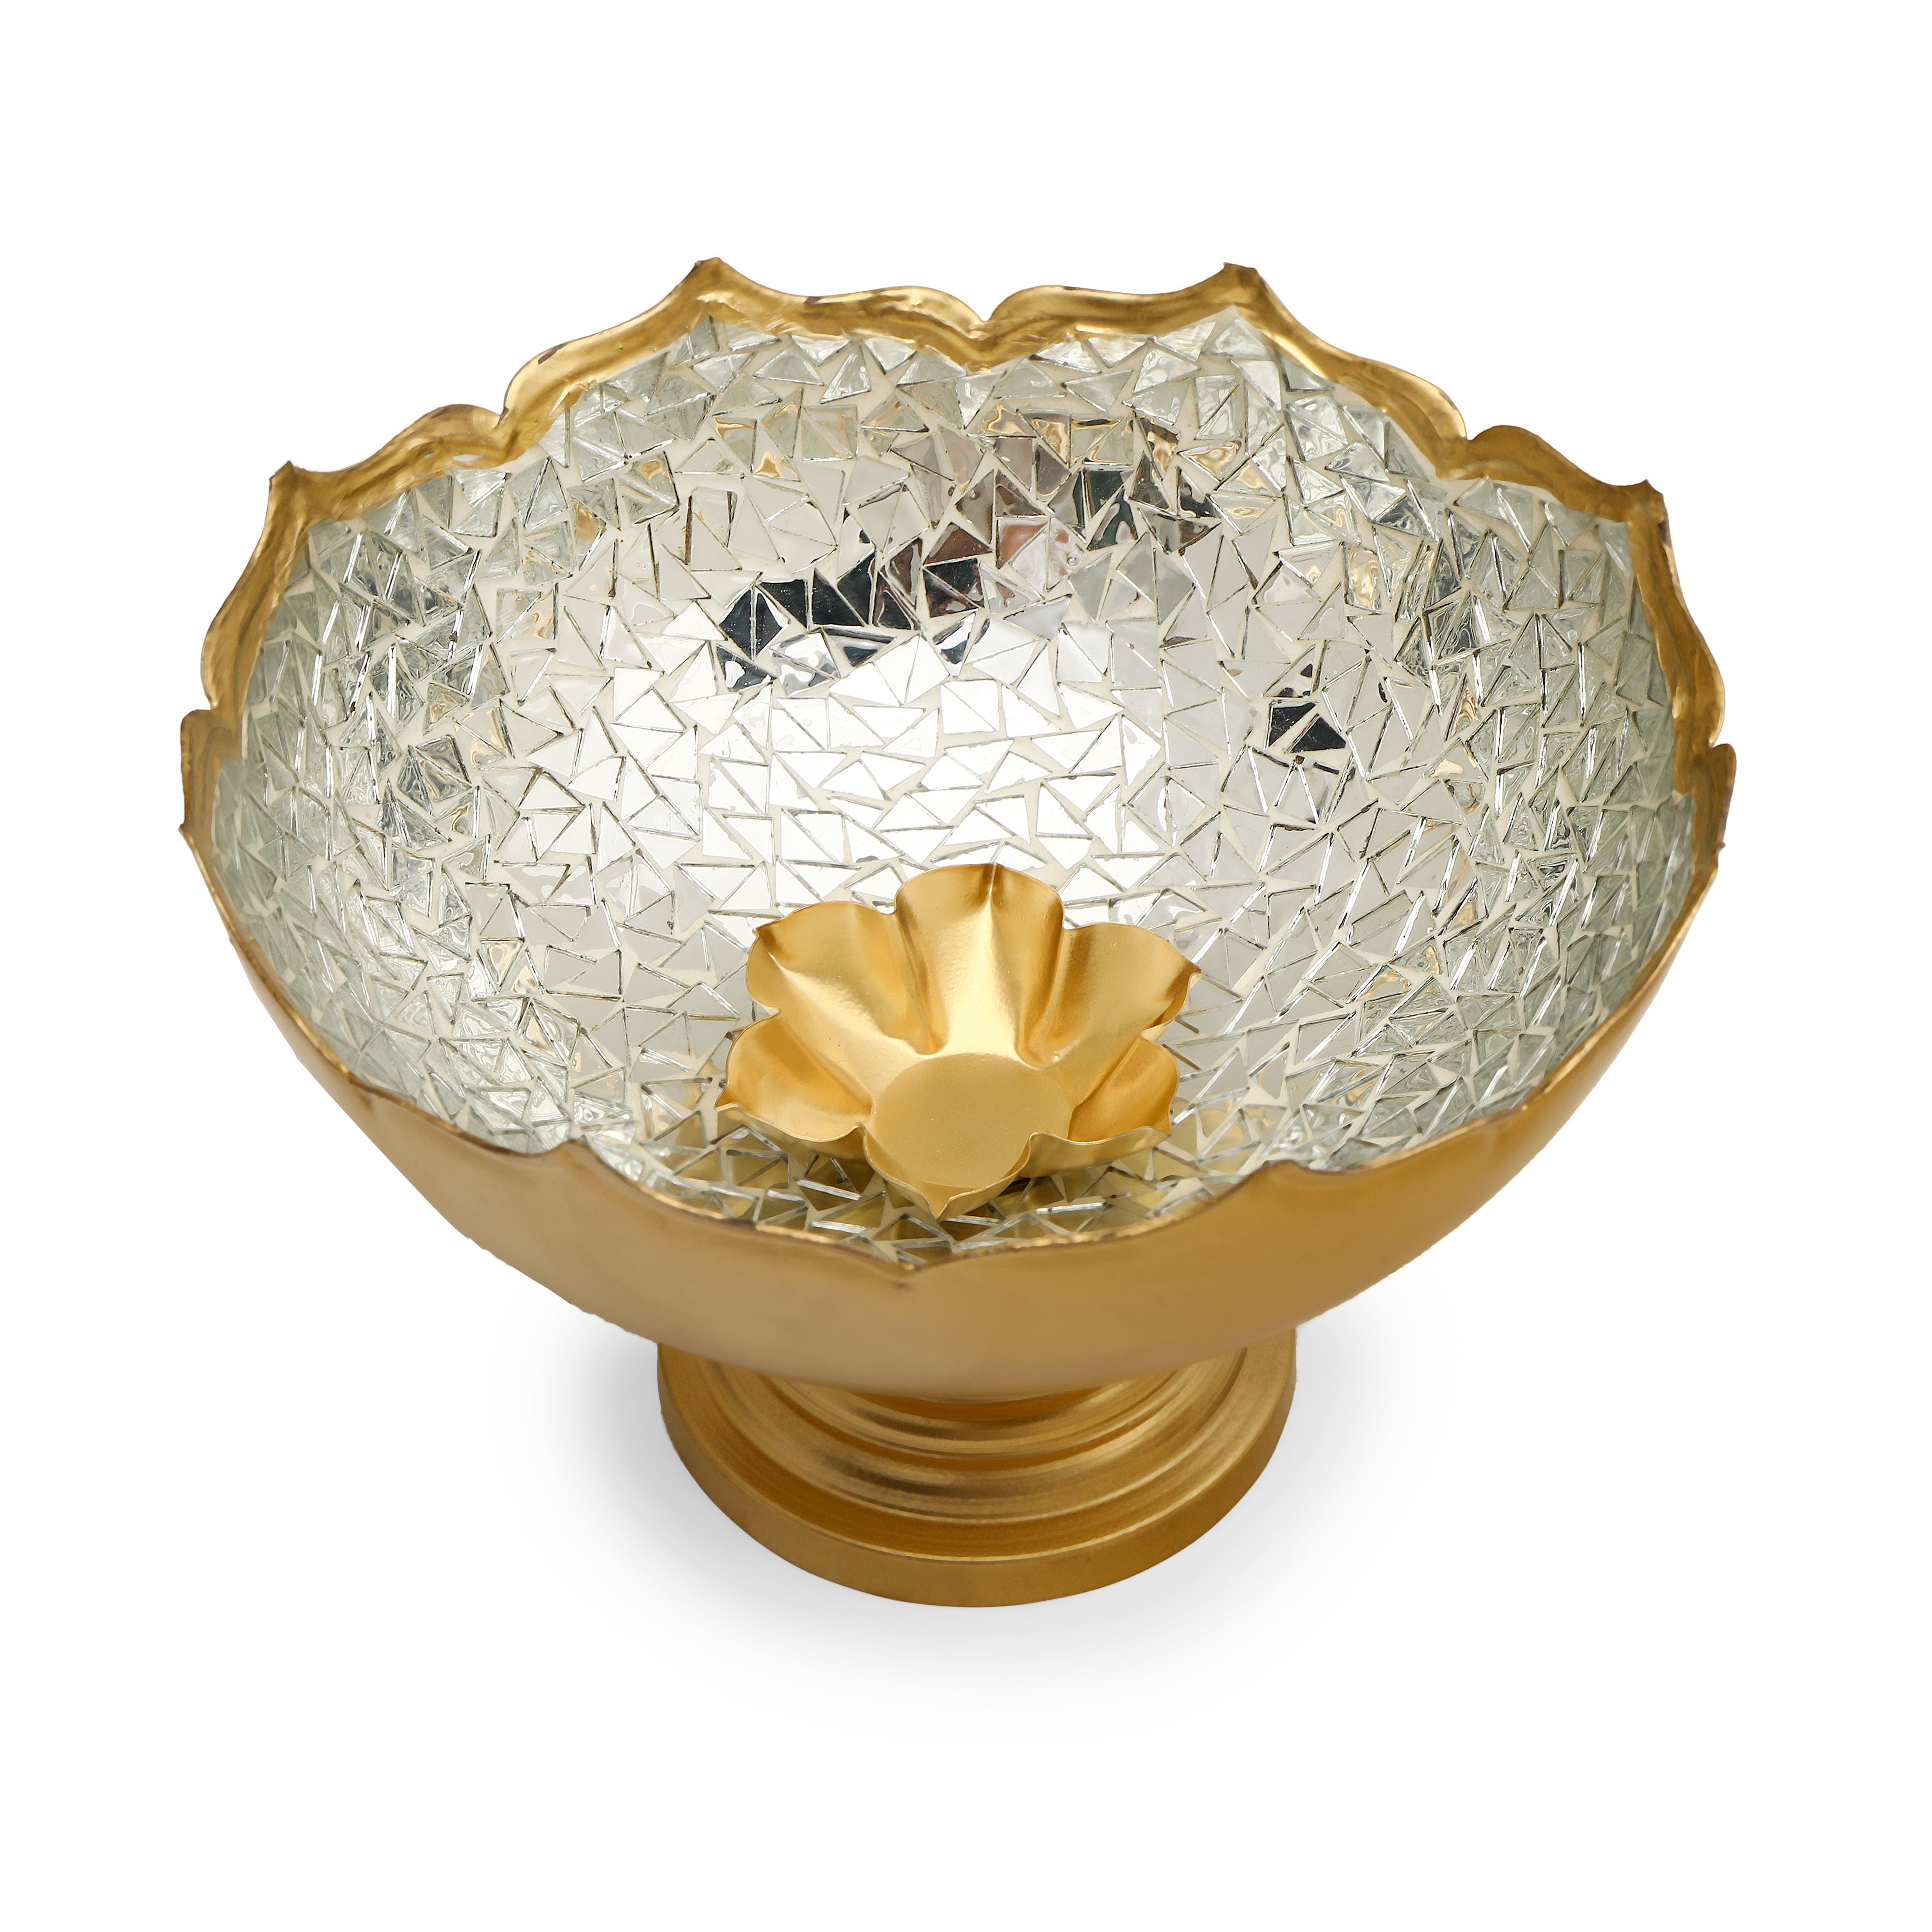 Silver Mosaic Urli with Stand 10.5" Inch (Medium) 3- The Home Co.